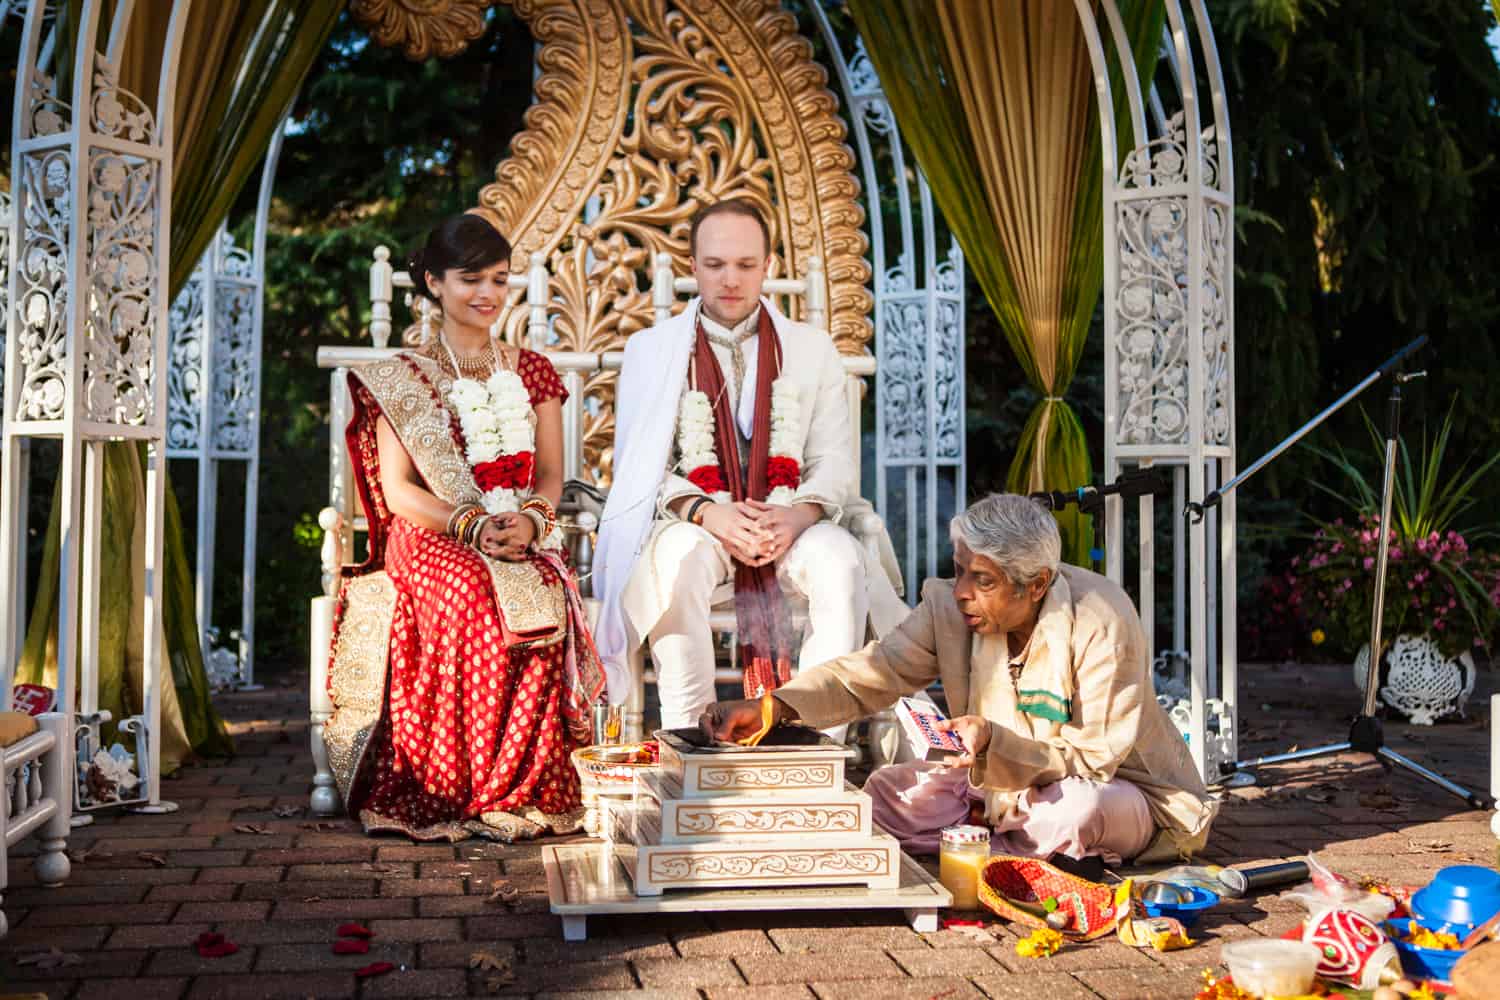 Bride and groom with priest during traditional Hindu wedding ceremony